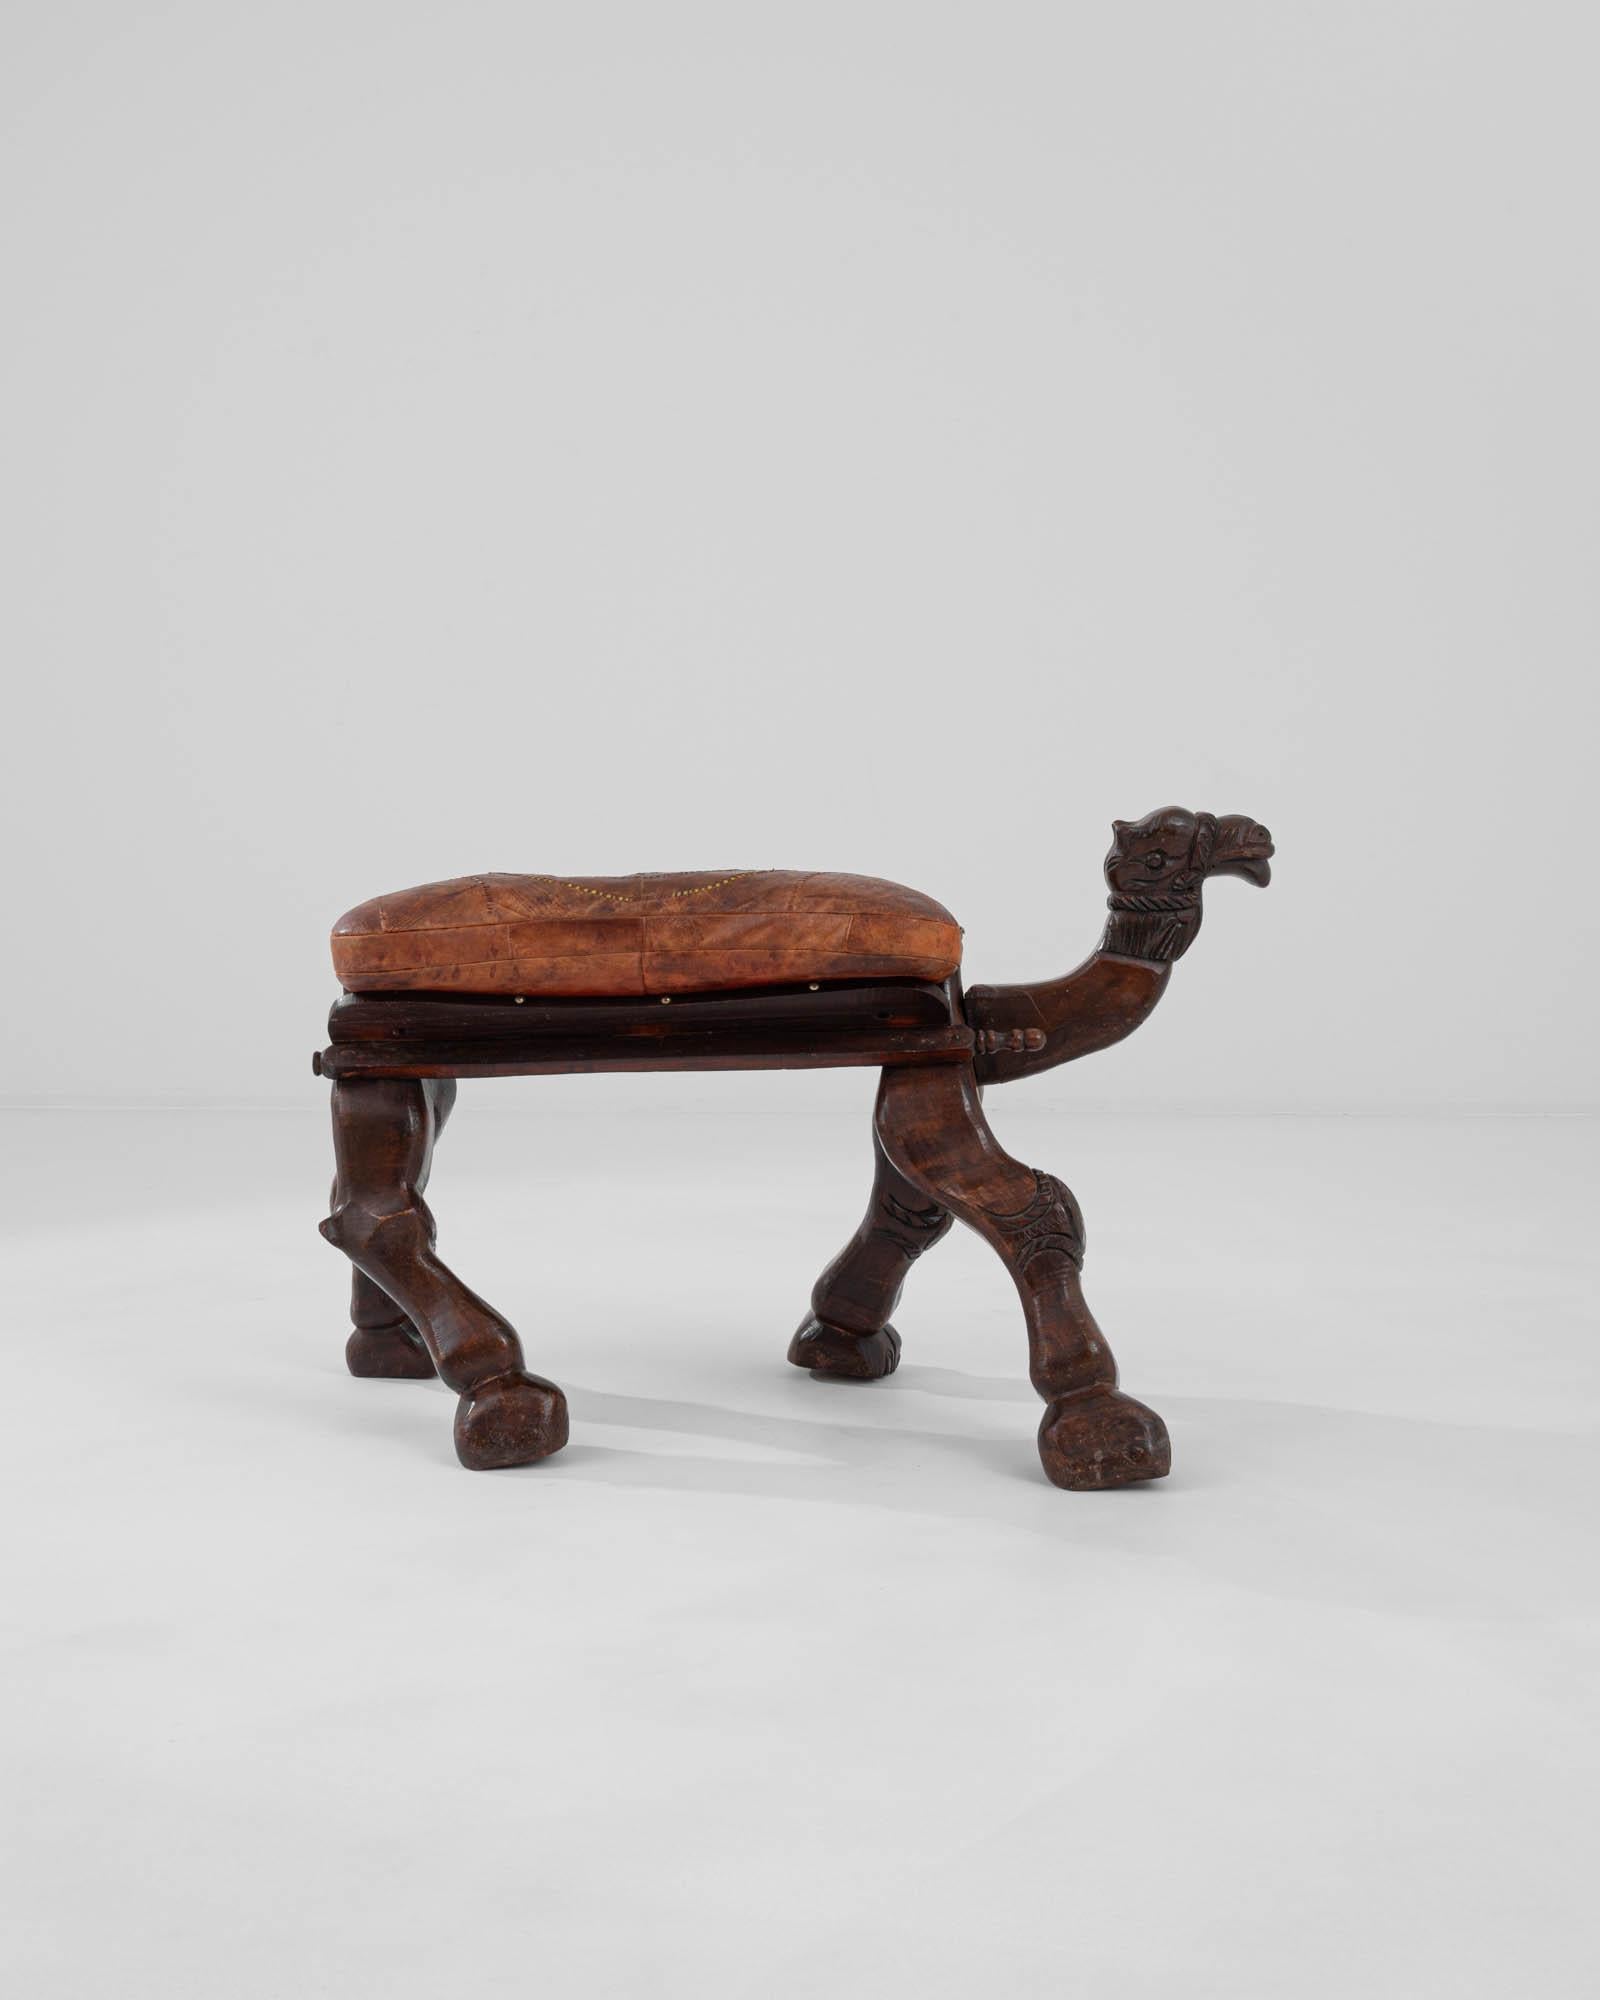 20th Century African Wooden Camel Stool with Leather Seat 1